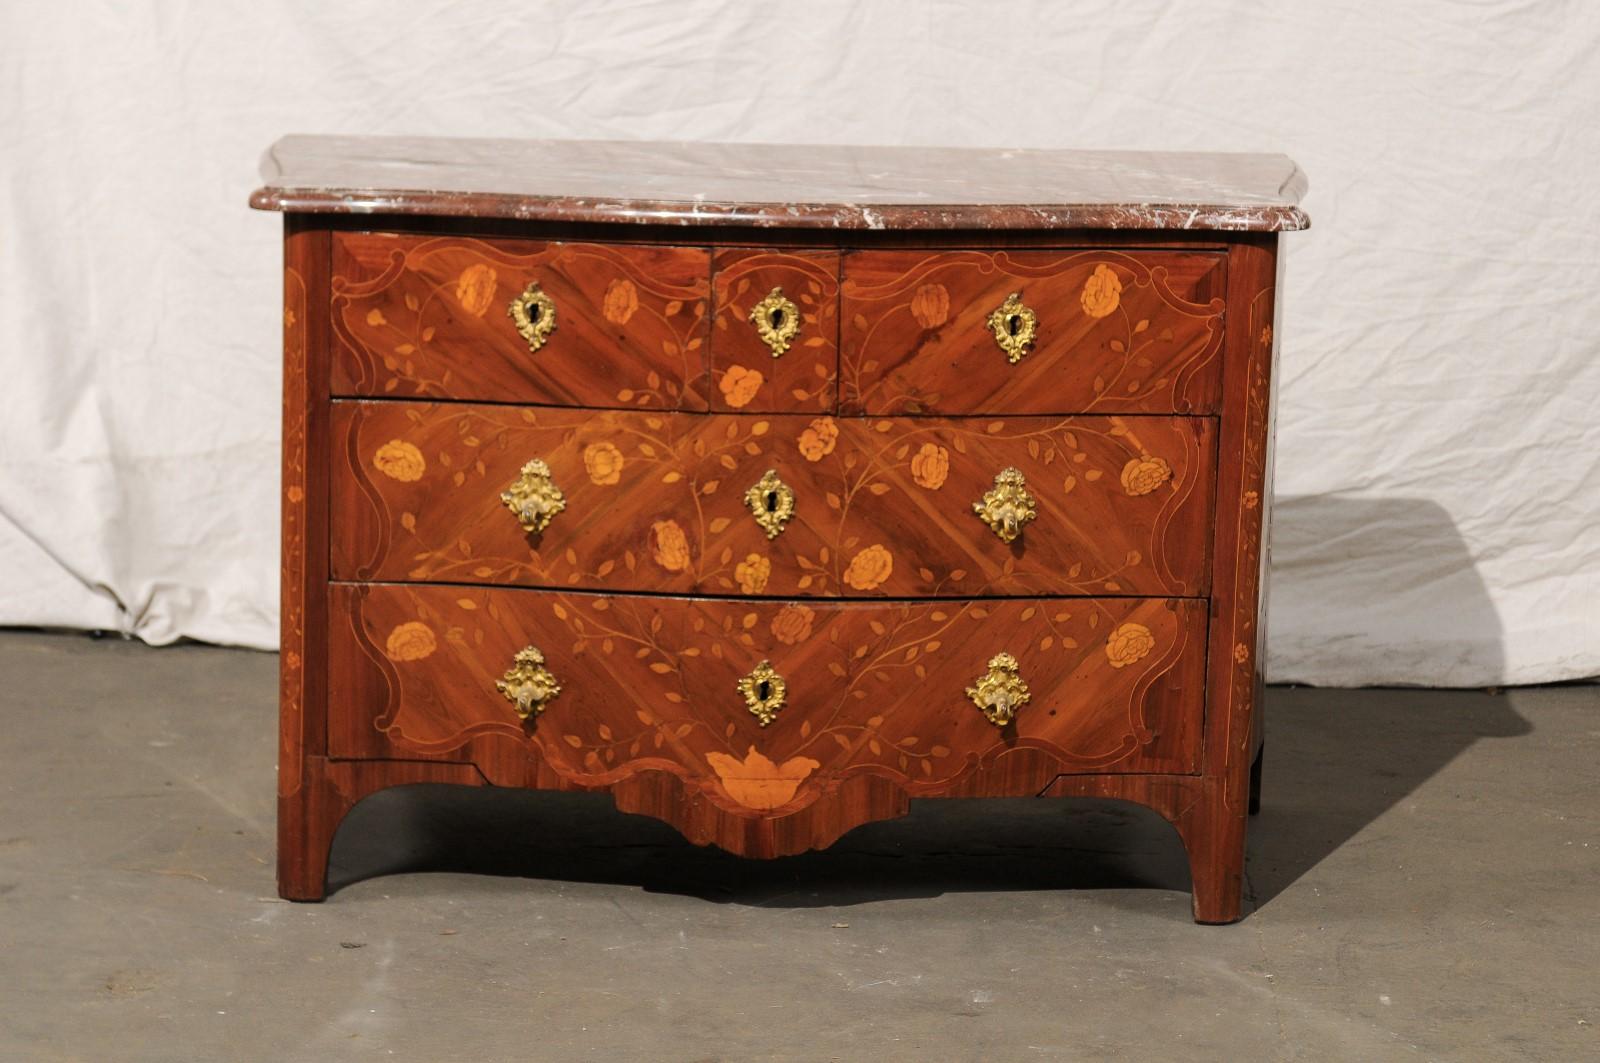 Mid-18th century Regence marquetry marble-top commode.